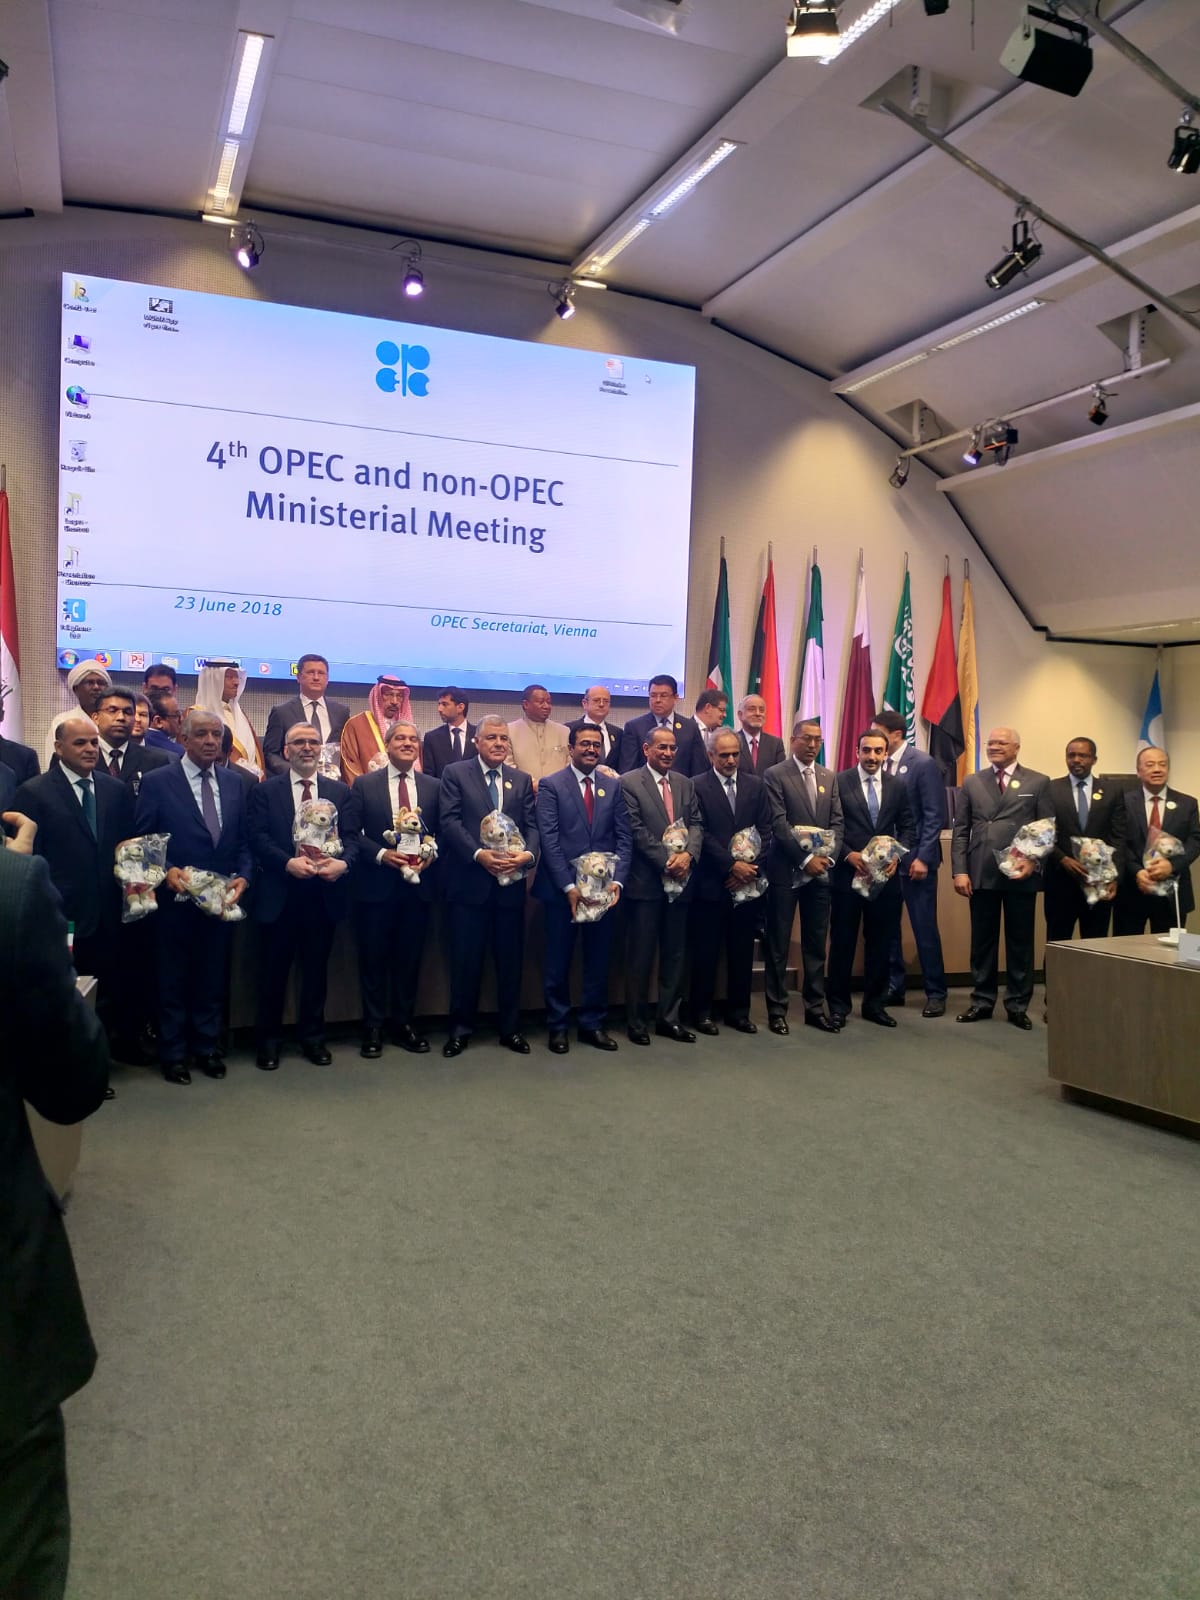 Meeting of OPEC and non-OPEC oil ministers